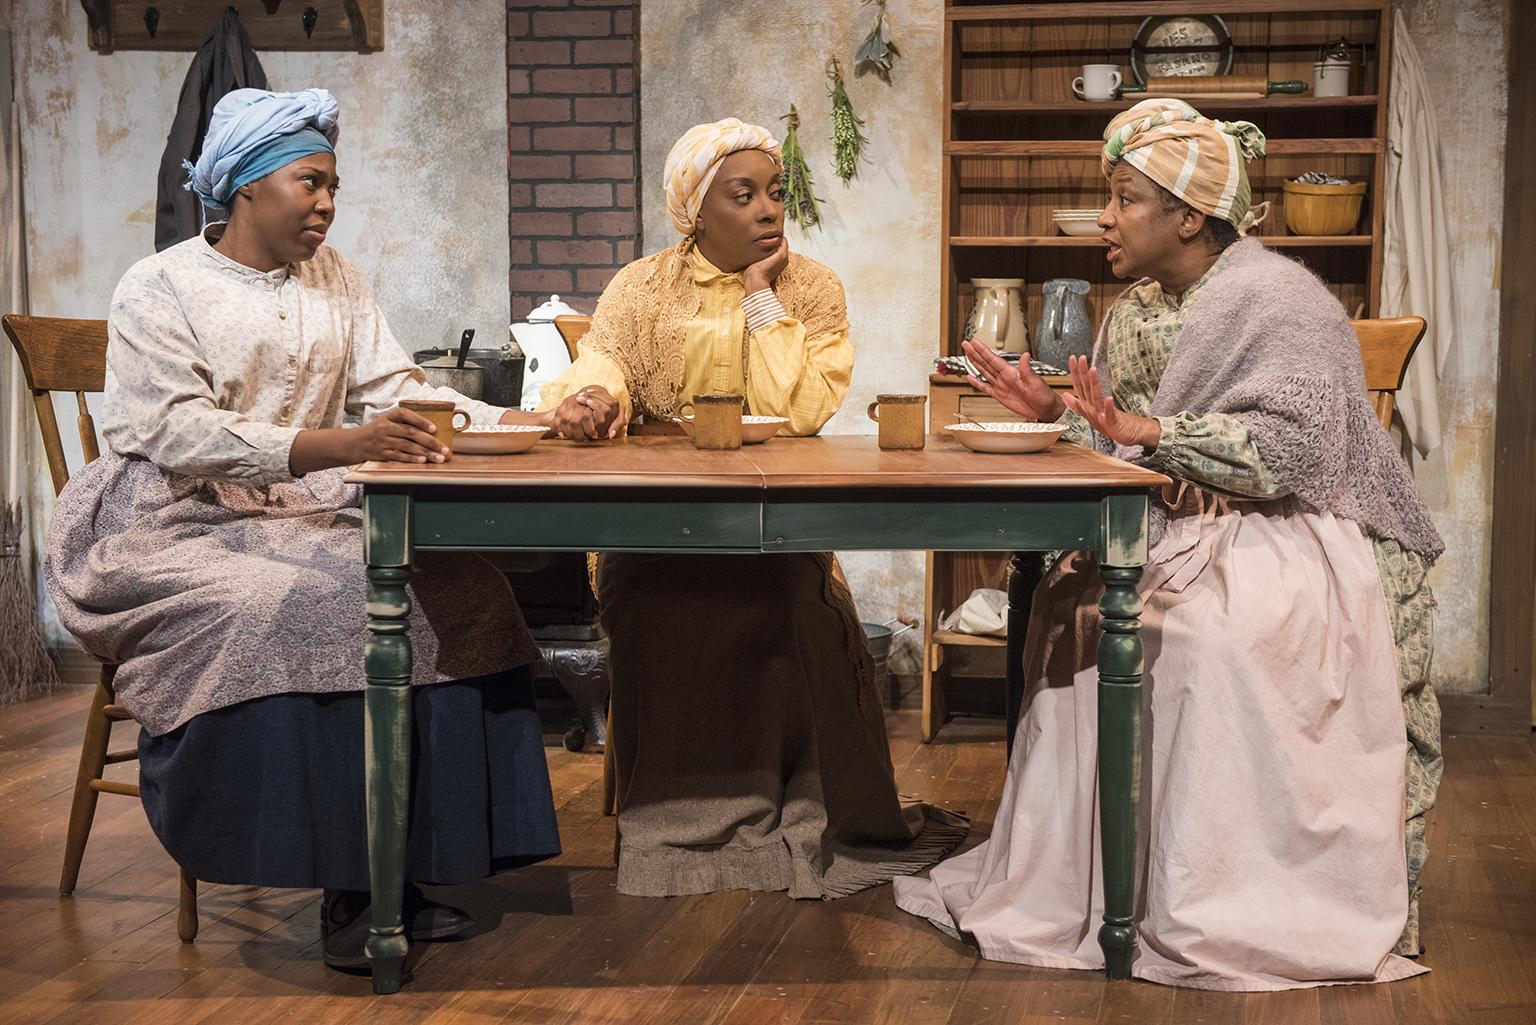 From left: Tiffany Oglesby, Sydney Charles and Joslyn Jones in American Blues Theater’s production of “Flyin’ West.” (Photo by Michael Brosilow)